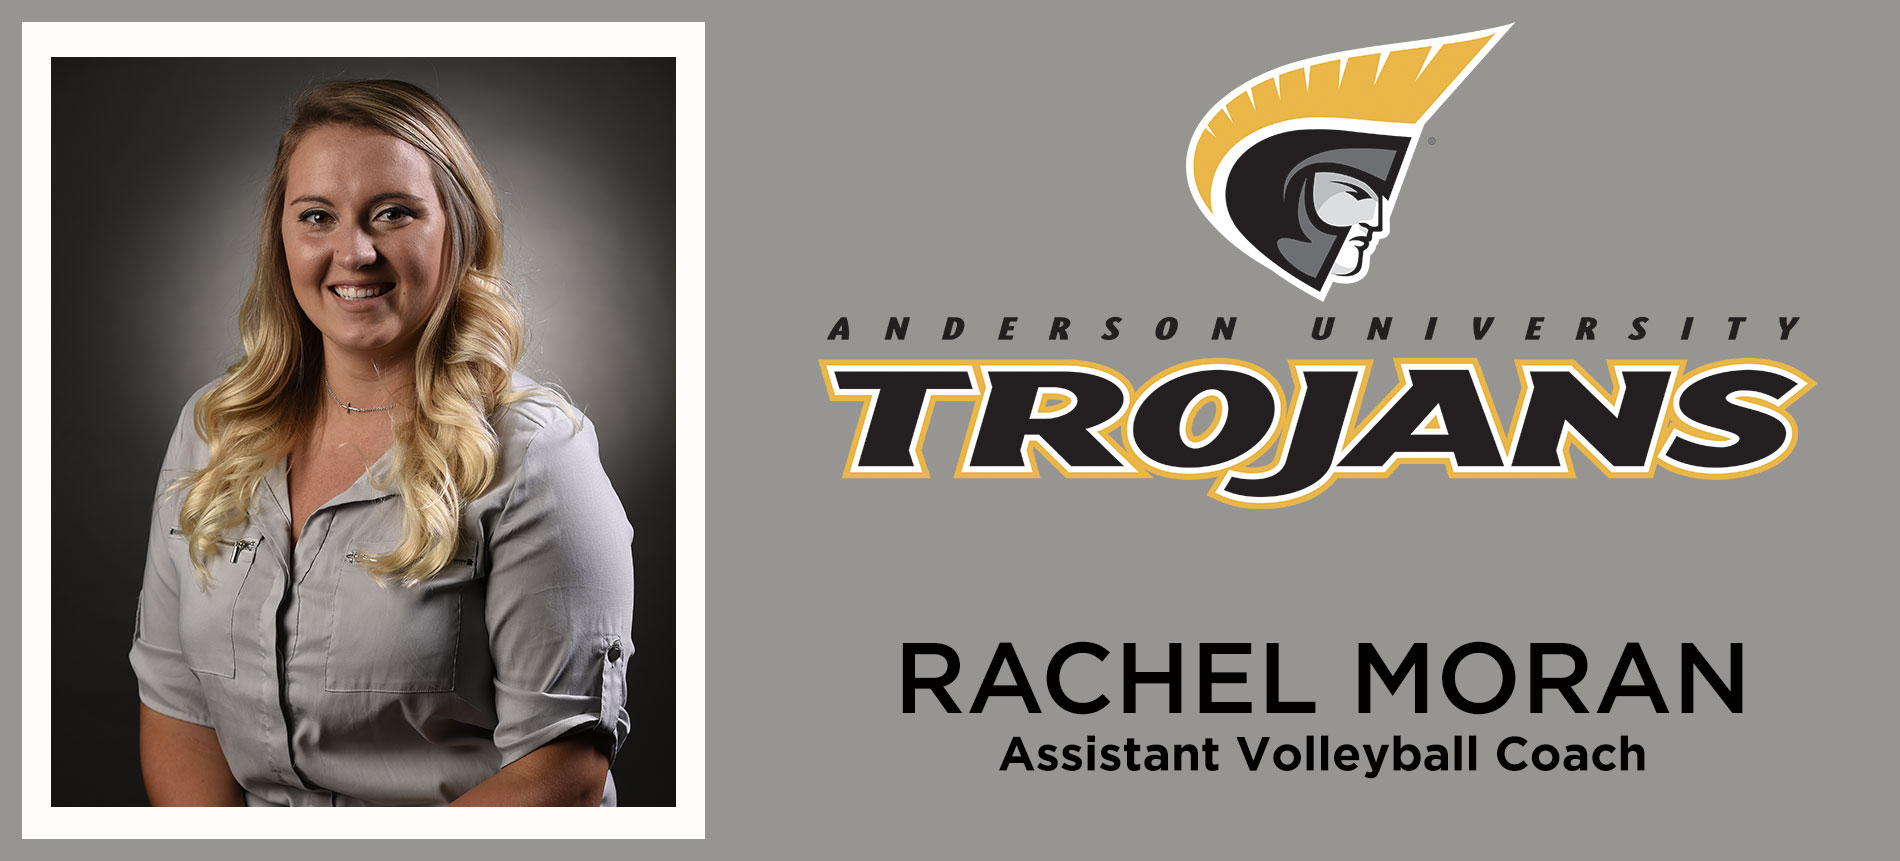 Moran Joins Volleyball Coaching Staff